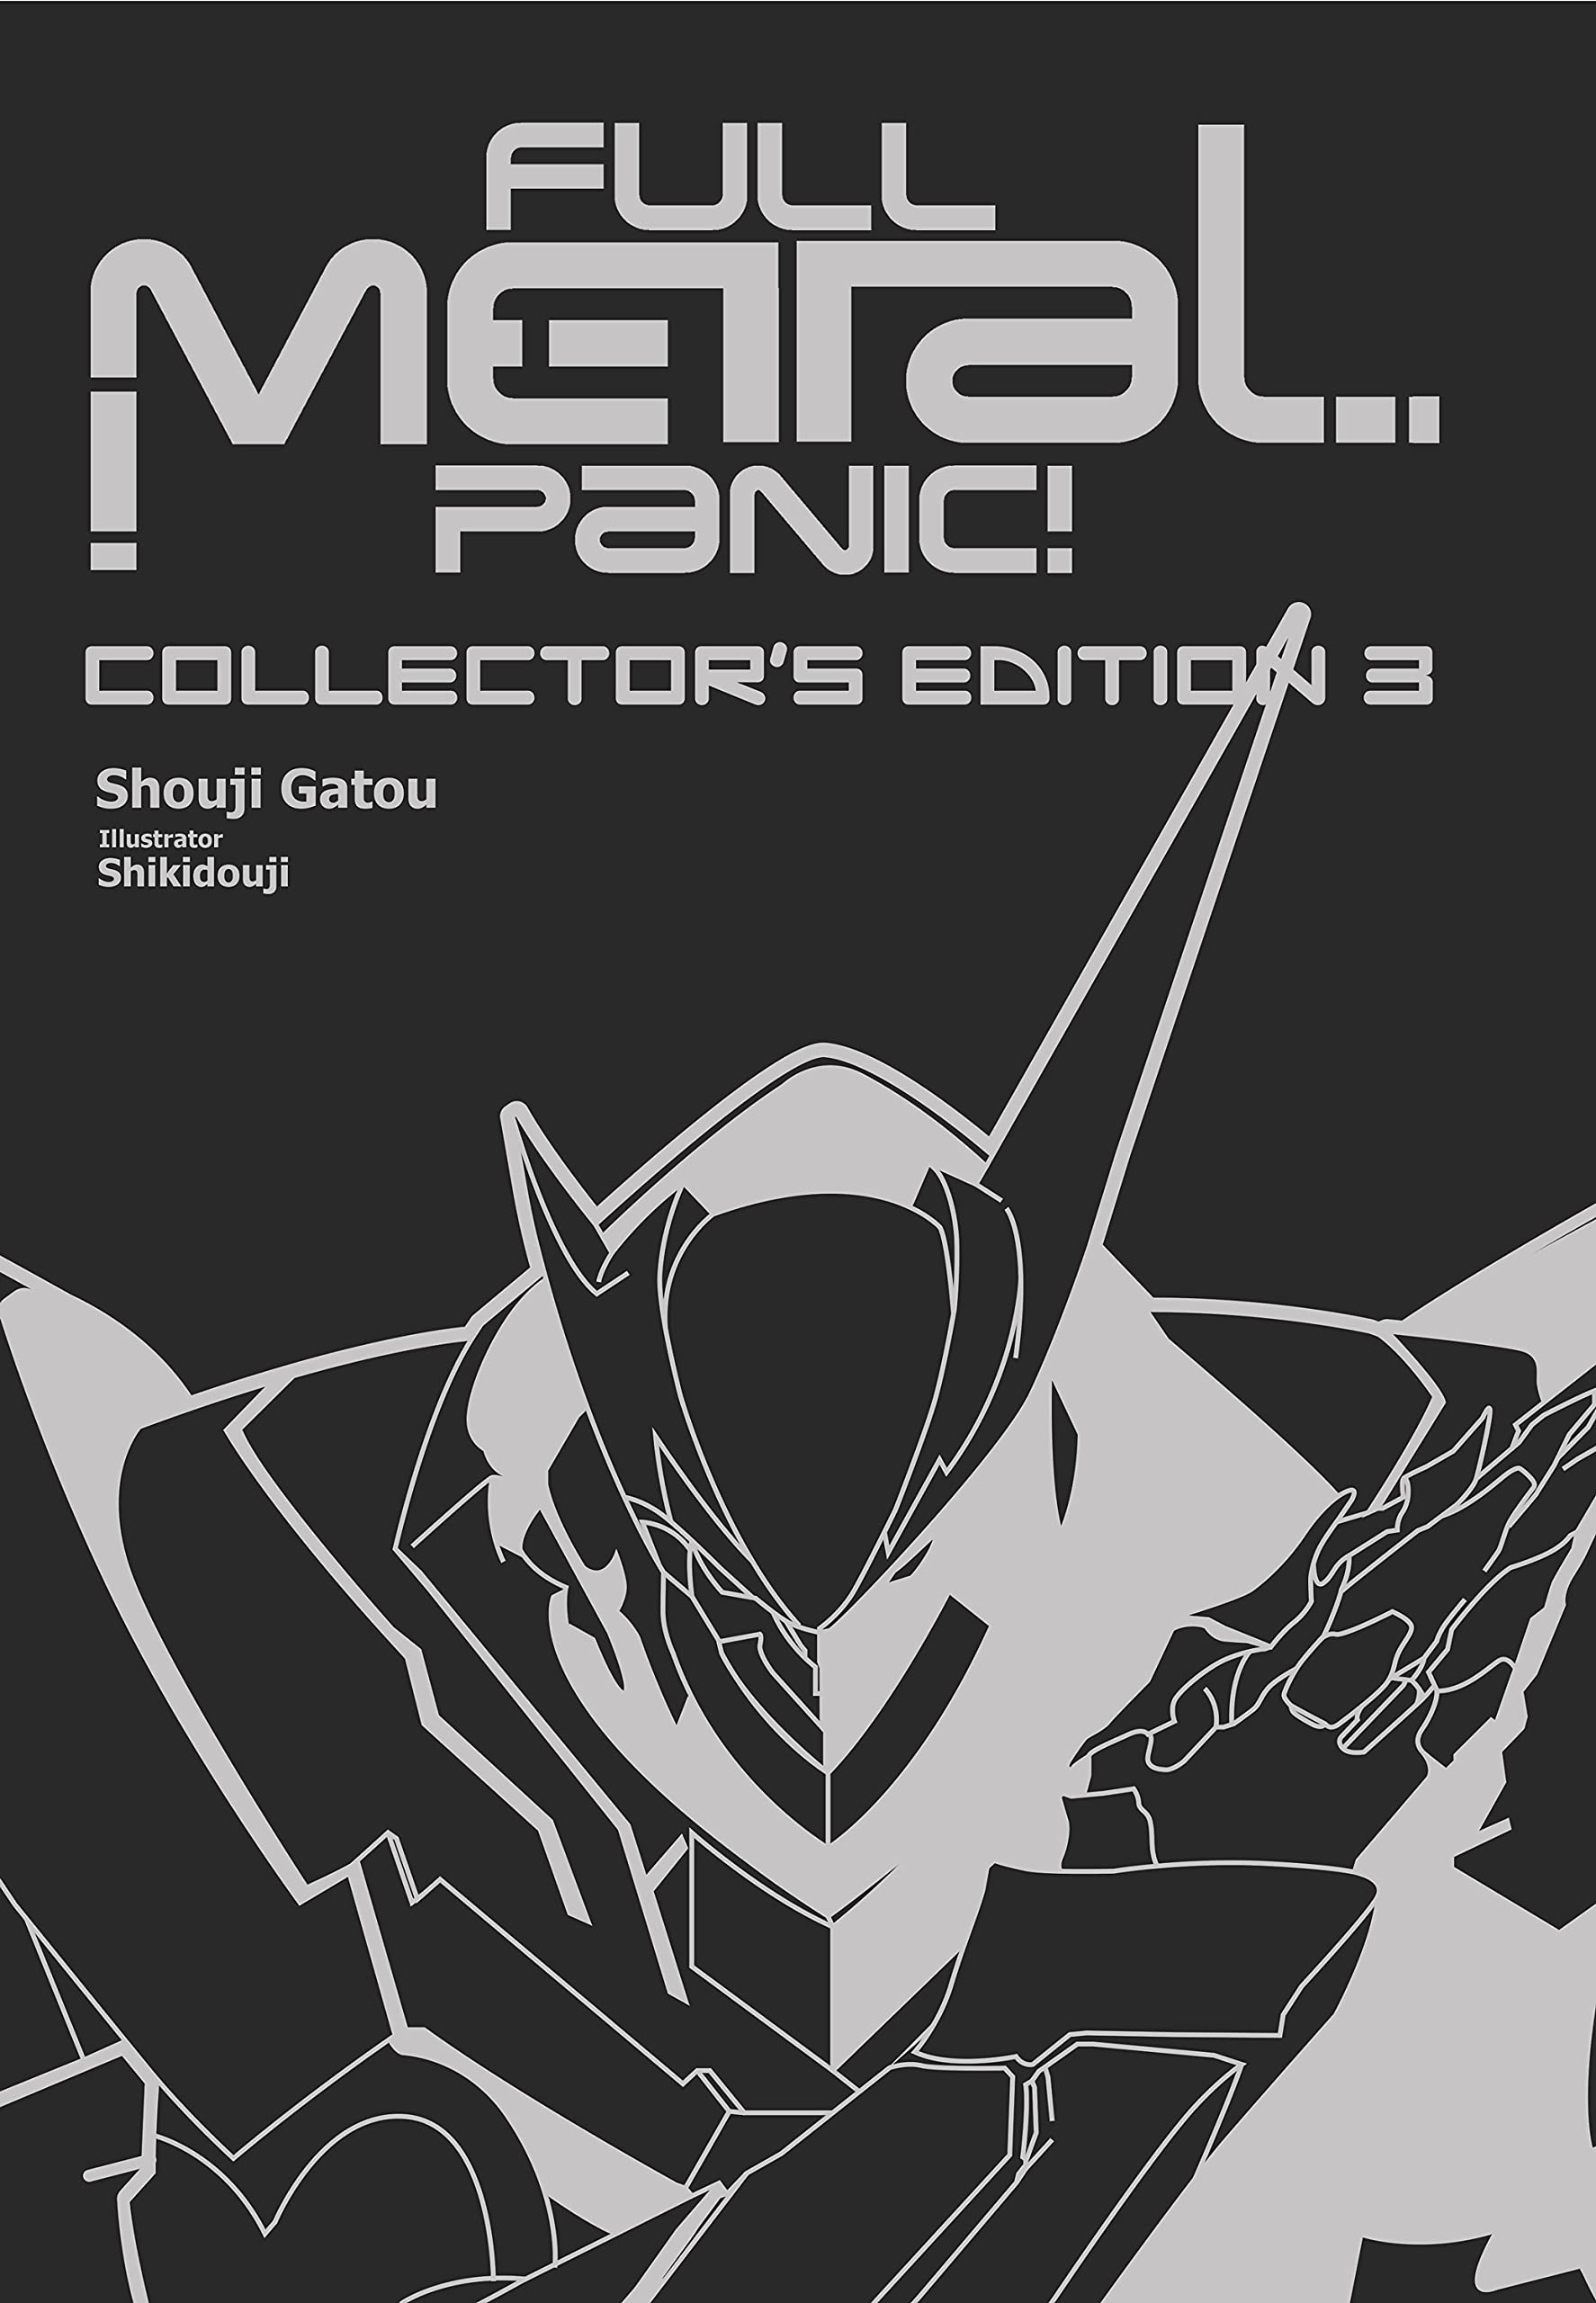 Full Metal Panic! Volumes 07-09 Collector's Edition